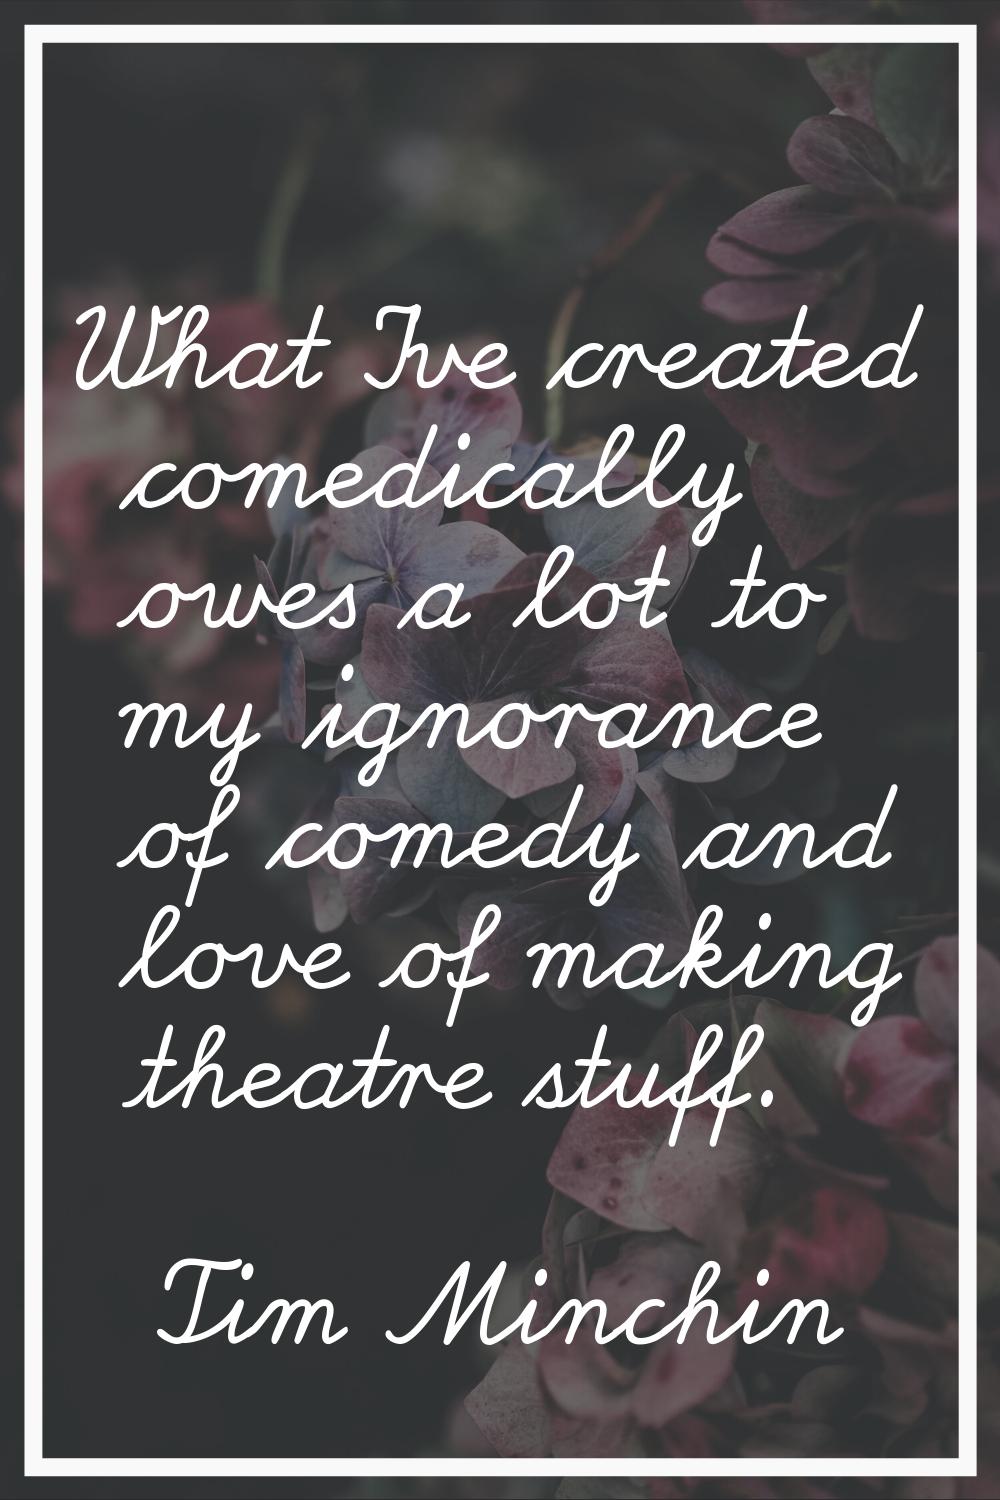 What I've created comedically owes a lot to my ignorance of comedy and love of making theatre stuff